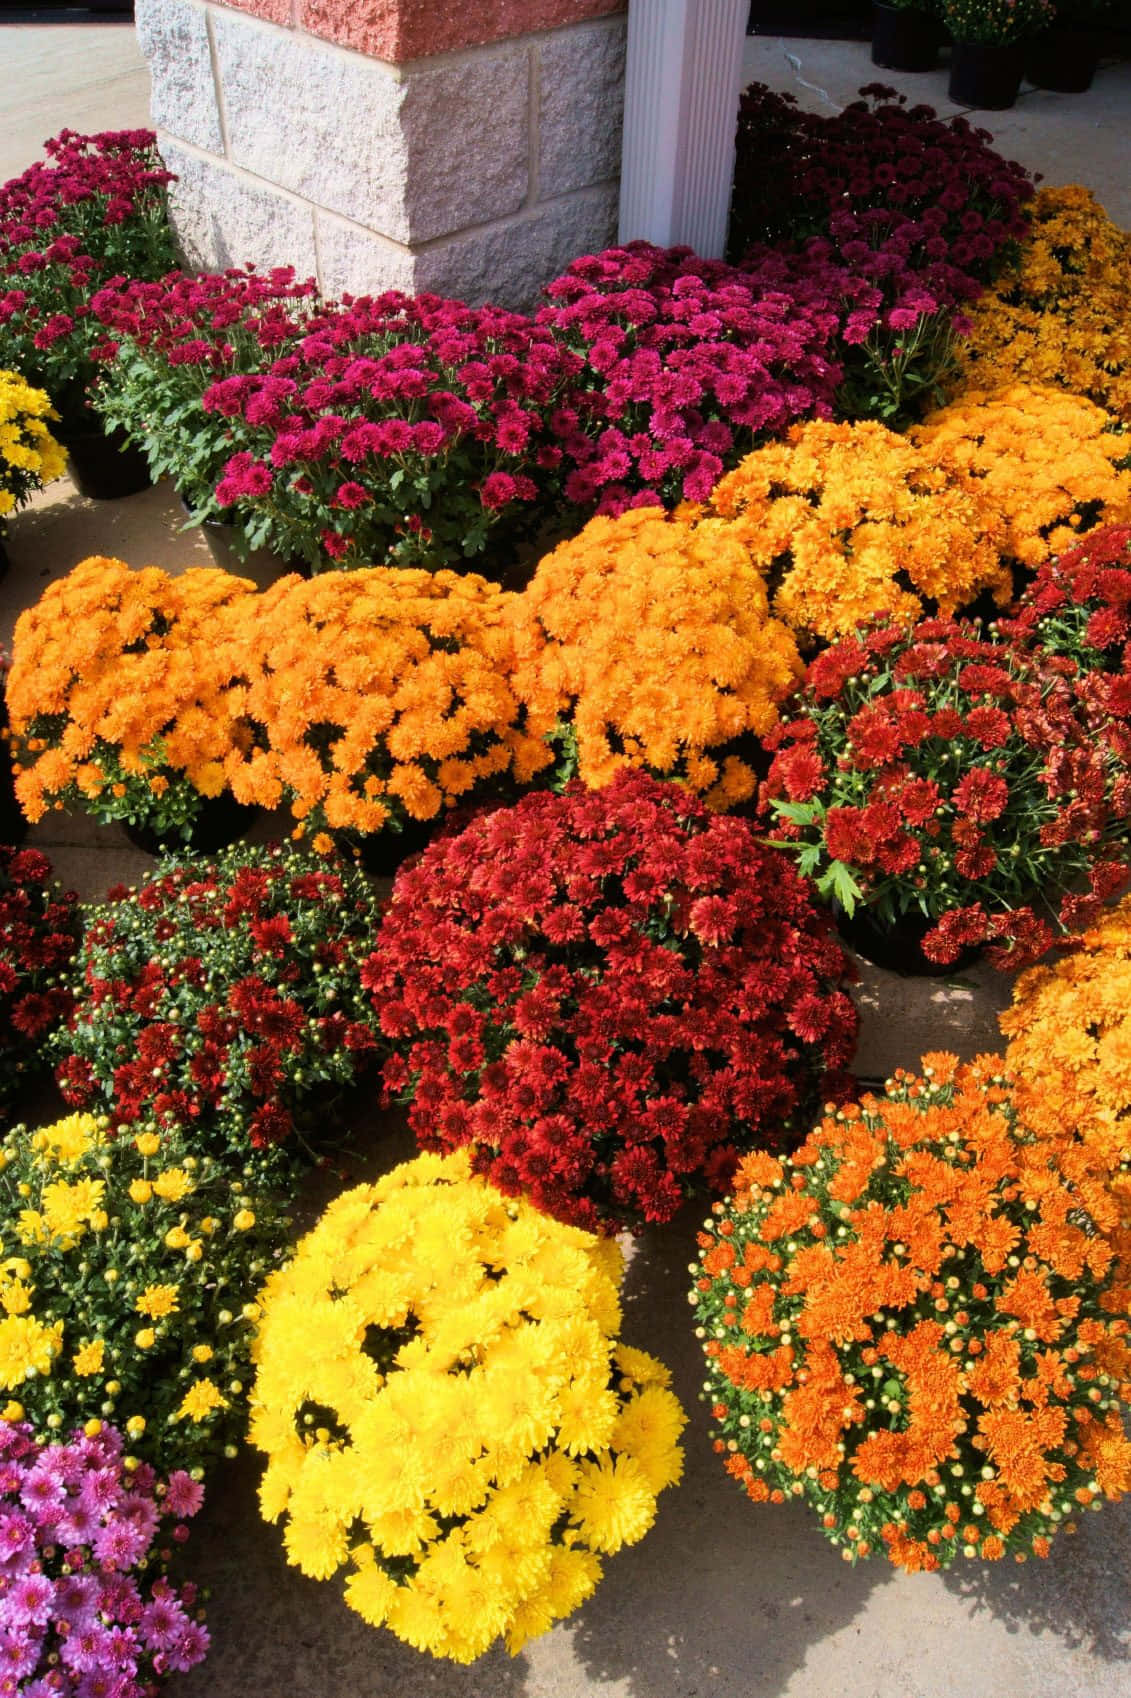 A brightness of color and aroma - a Chrysanthemum